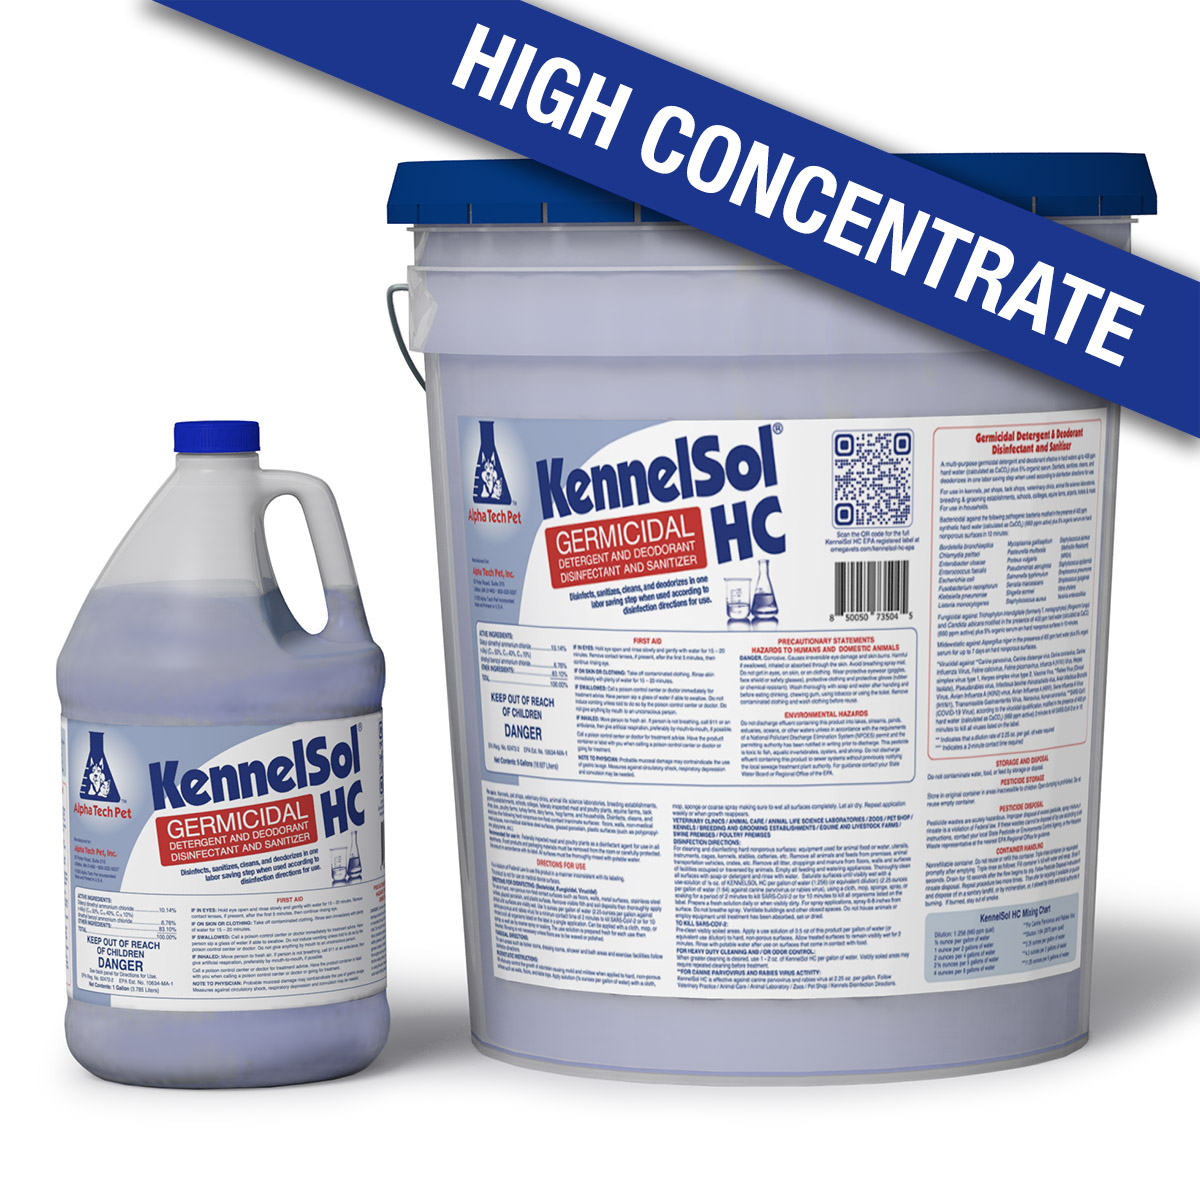 KennelSol HC Germicidal Cleaner & Disinfectant - High Concentrate - 1 & 5 Gallon